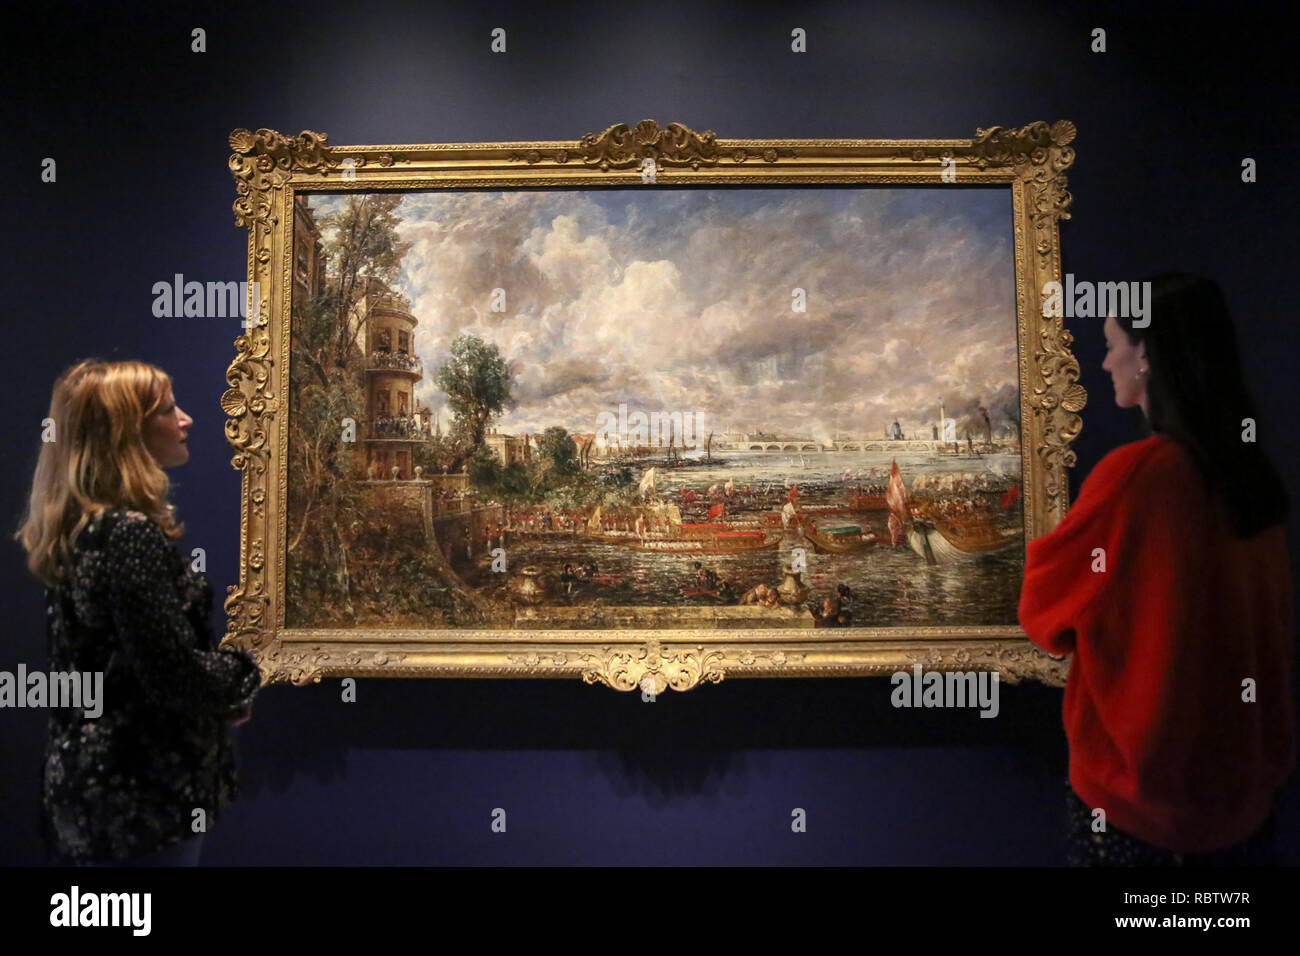 Staff members seen viewing a painting by John Constable. The Royal Academy Schools’ most illustrious graduates, exhibits Helvoetsluys (Helvoetsluys; - the City of Utrecht, 64, going to sea) 1832 by J.M.W. Turner (1775-1851) and The opening of Waterloo Bridge (ÒWaterloo Bridge, from the Whitehall Stairs, 18th June 1817) by John Constable (1776-1837), in, are-telling of one of the most legendary events in the history of the Summer Exhibition, it toke place at the Royal Academy of Arts. The two paintings were reunited for the first time since the artists clashed at the Summer Exhibition in 1832. Stock Photo